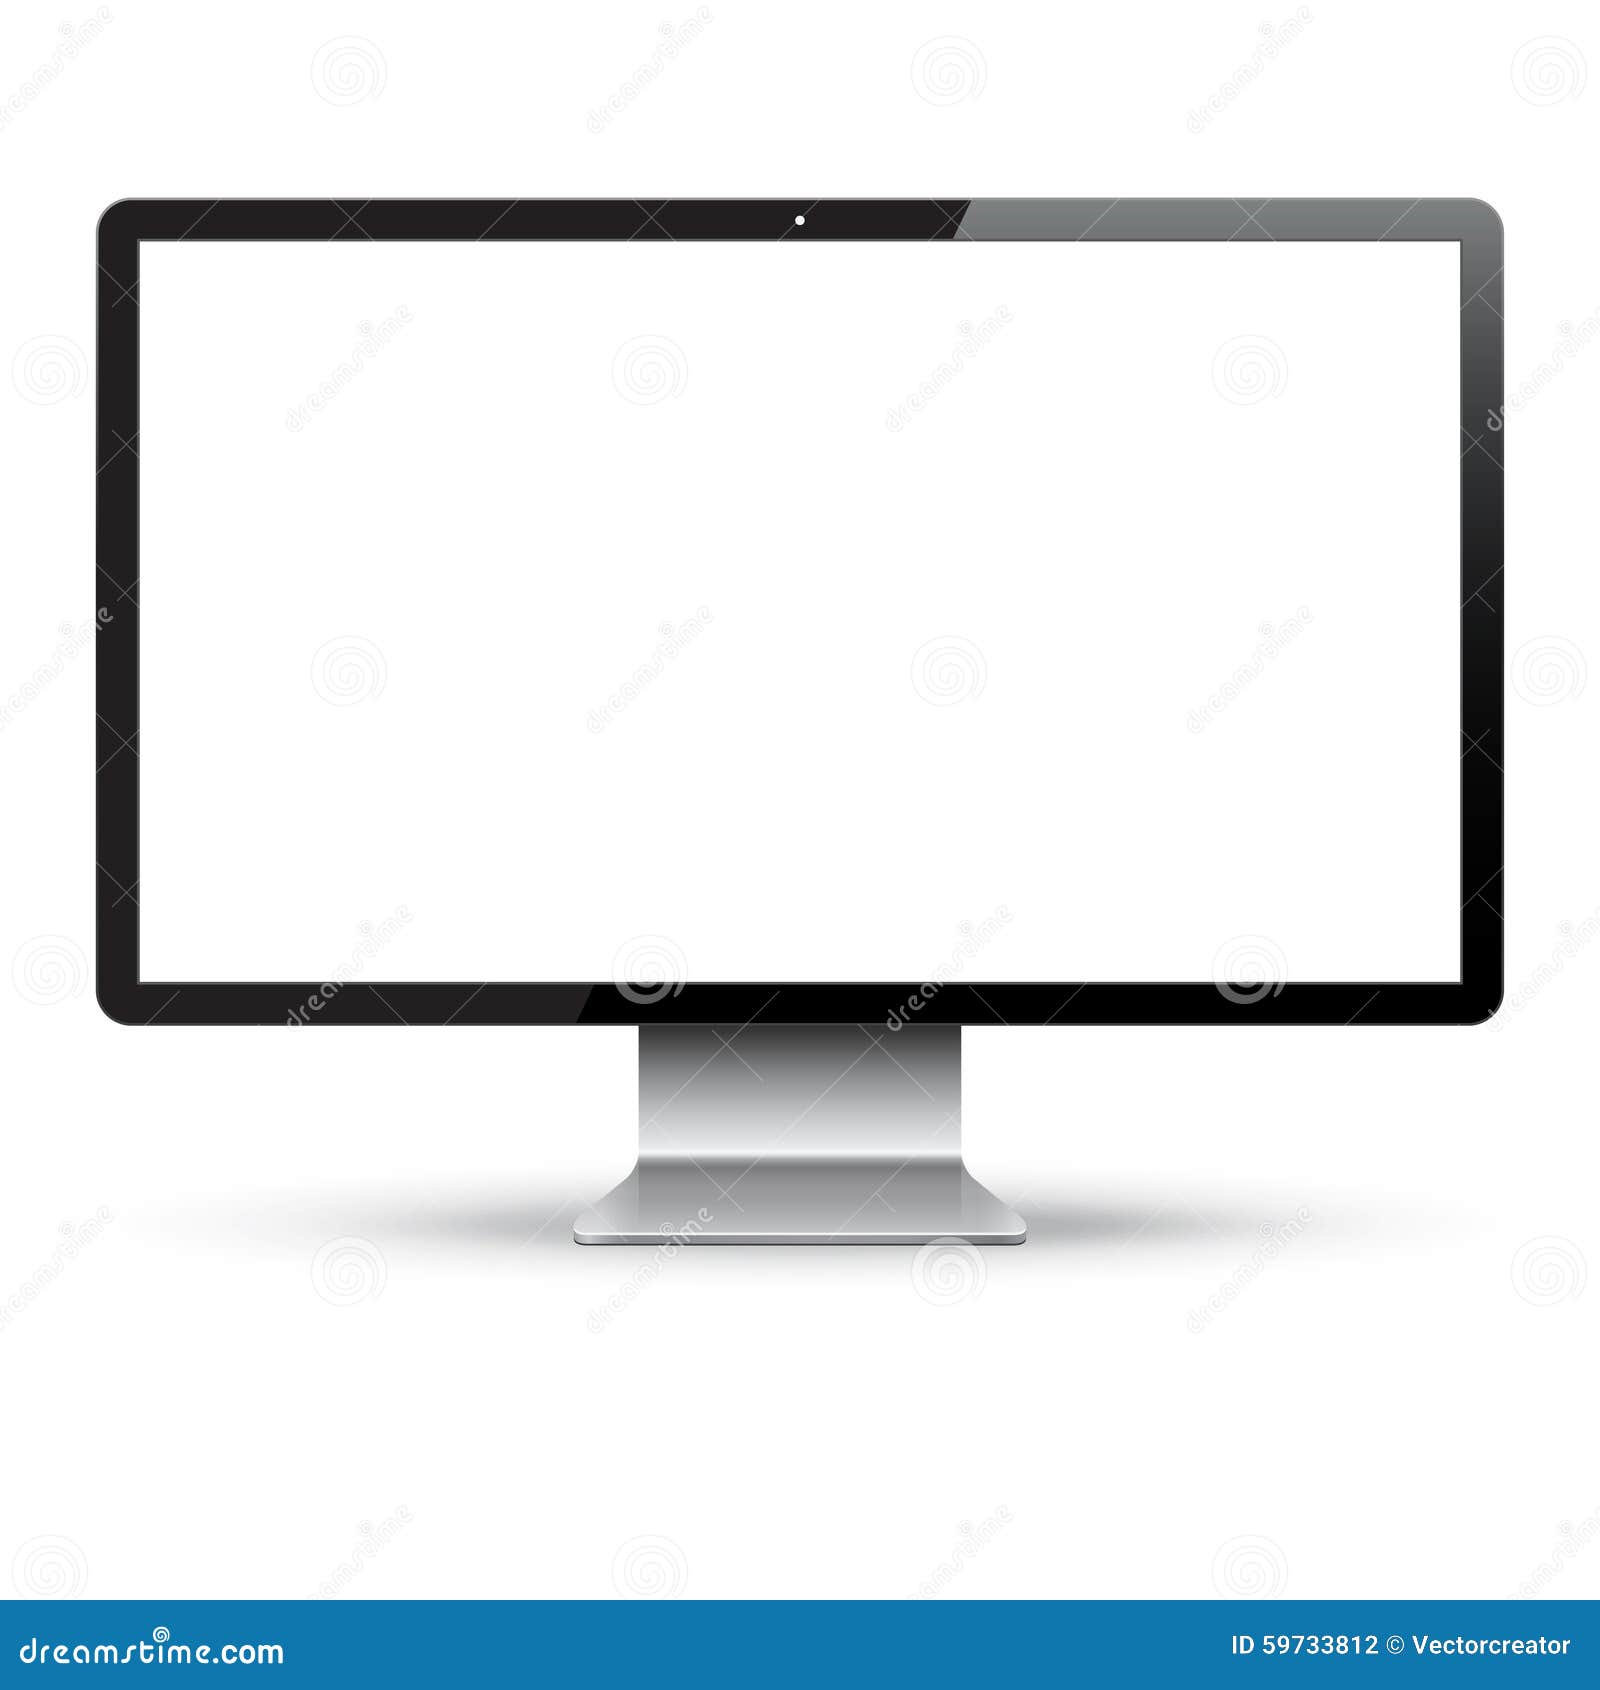 blank computer monitor on white